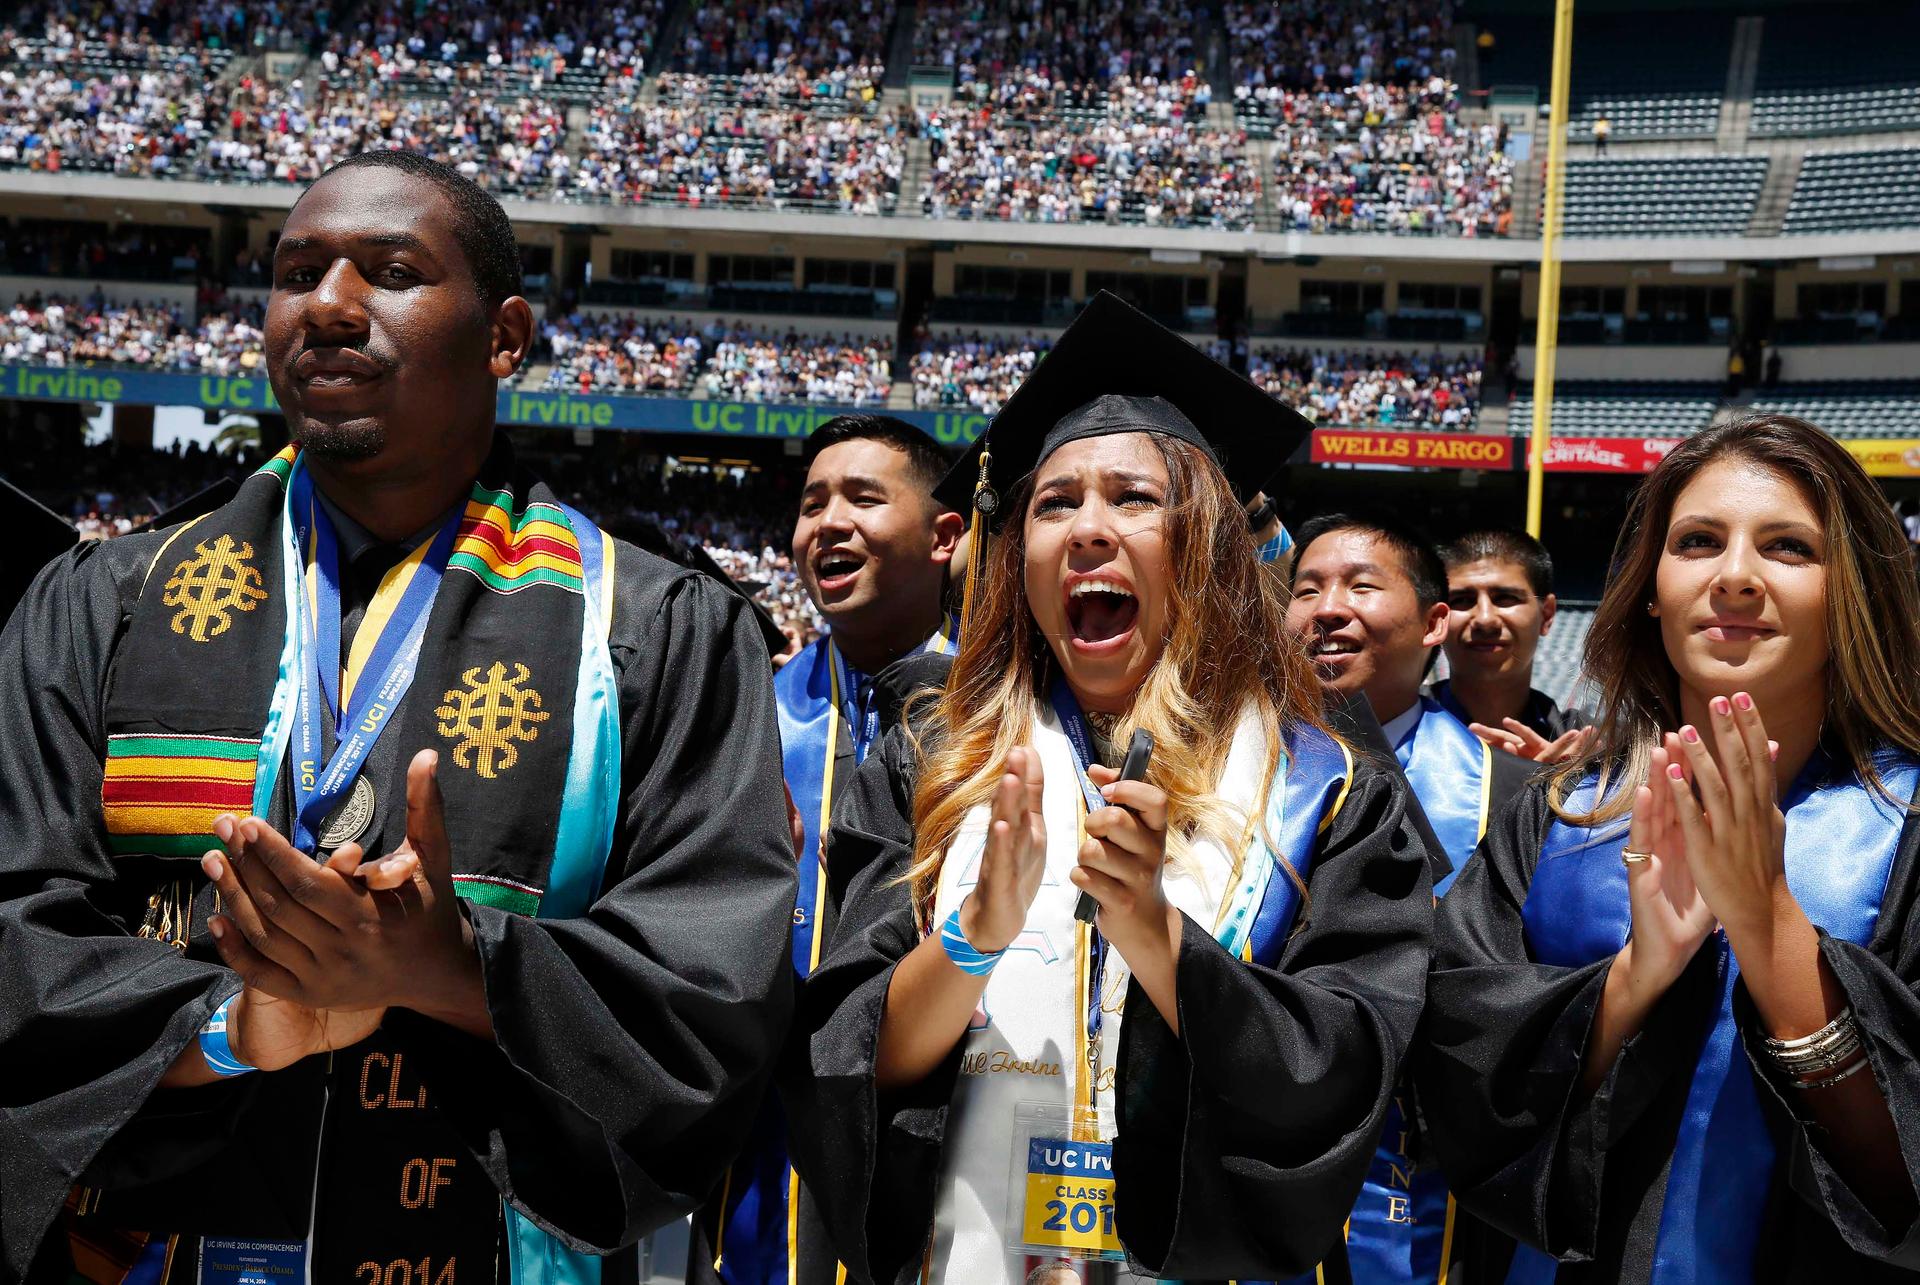 Students cheer as US President Barack Obama (not pictured) attends the 2014 commencement ceremony for the University of California, Irvine, while at Angels Stadium in Anaheim, California. 